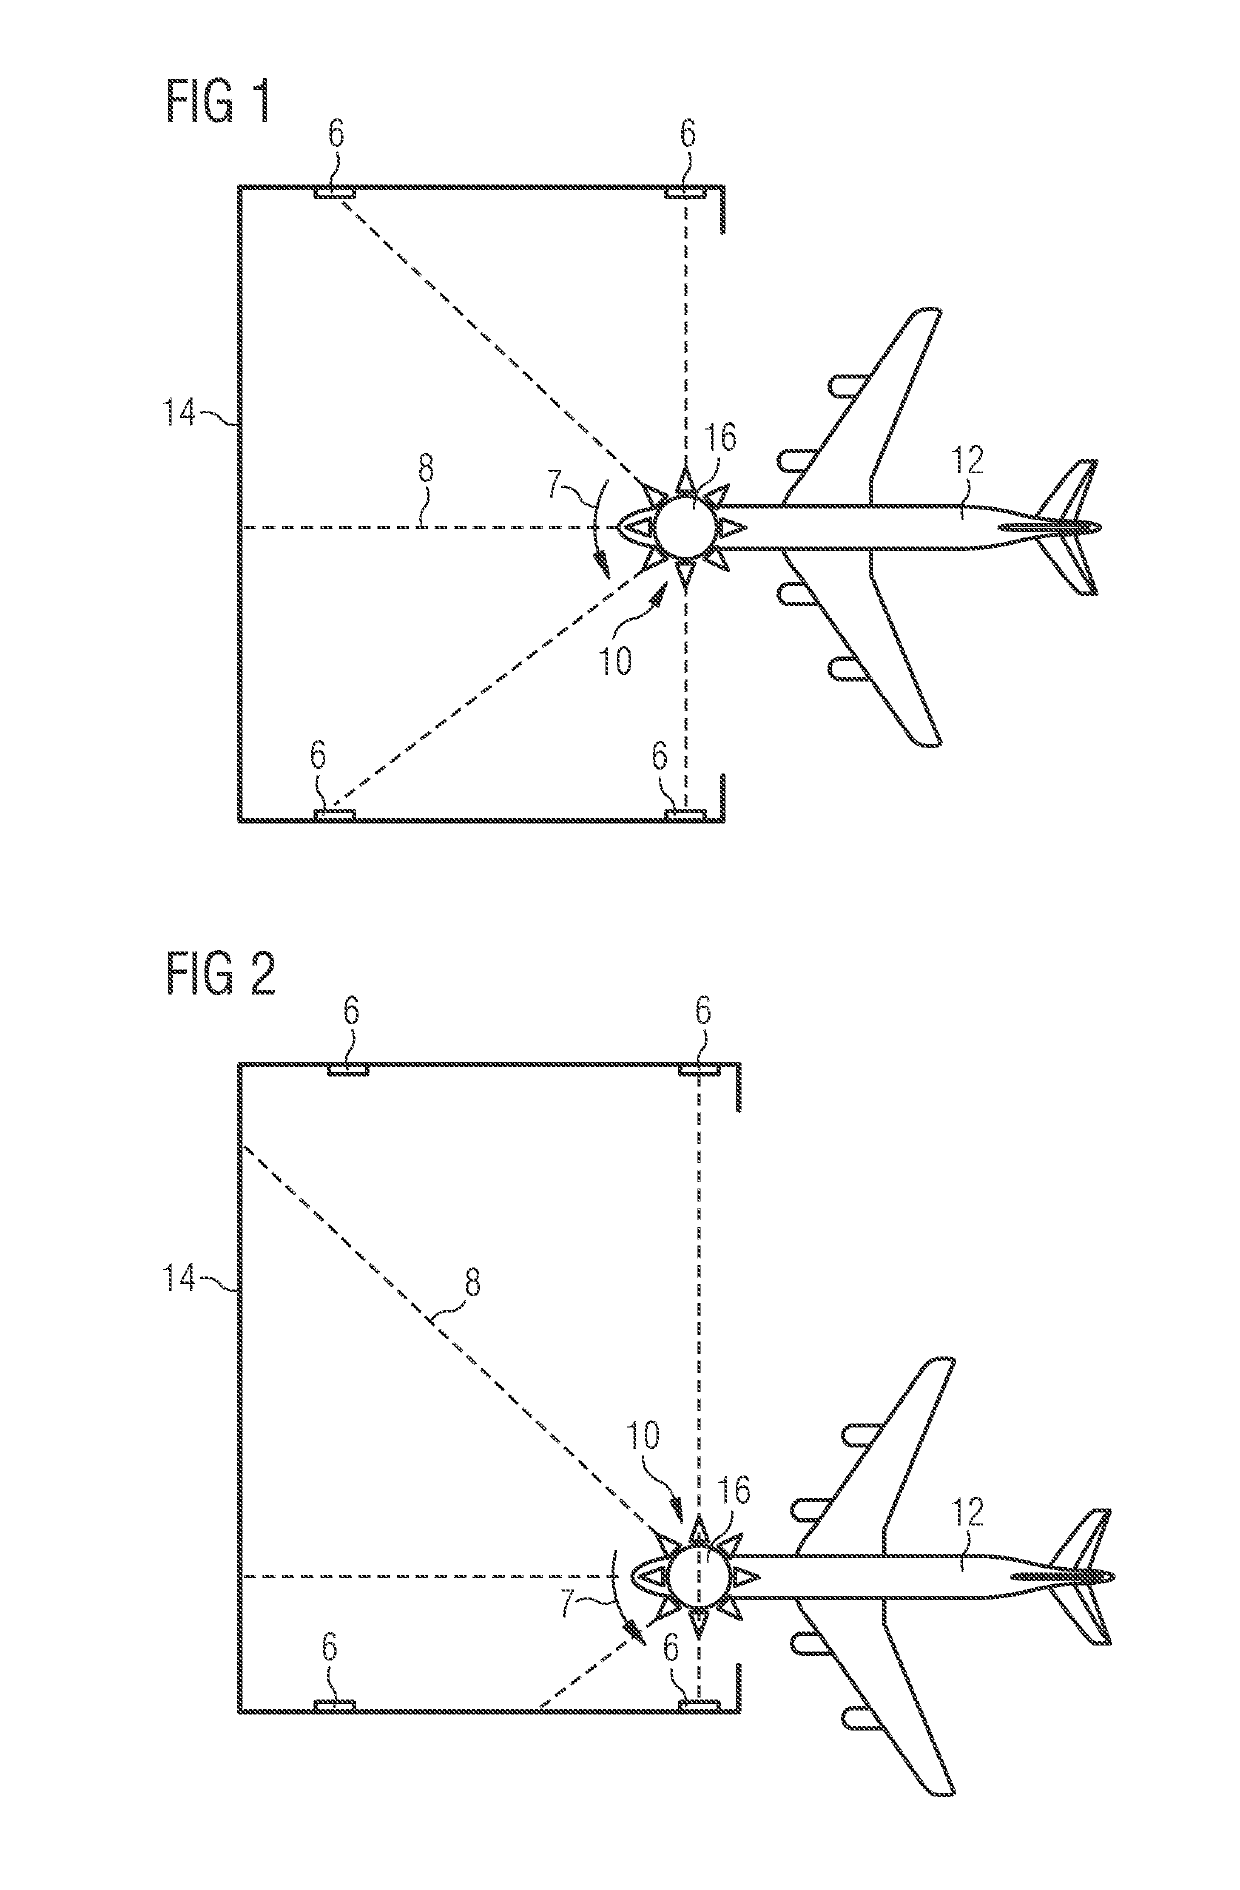 System and method for navigating an aircraft in a hangar